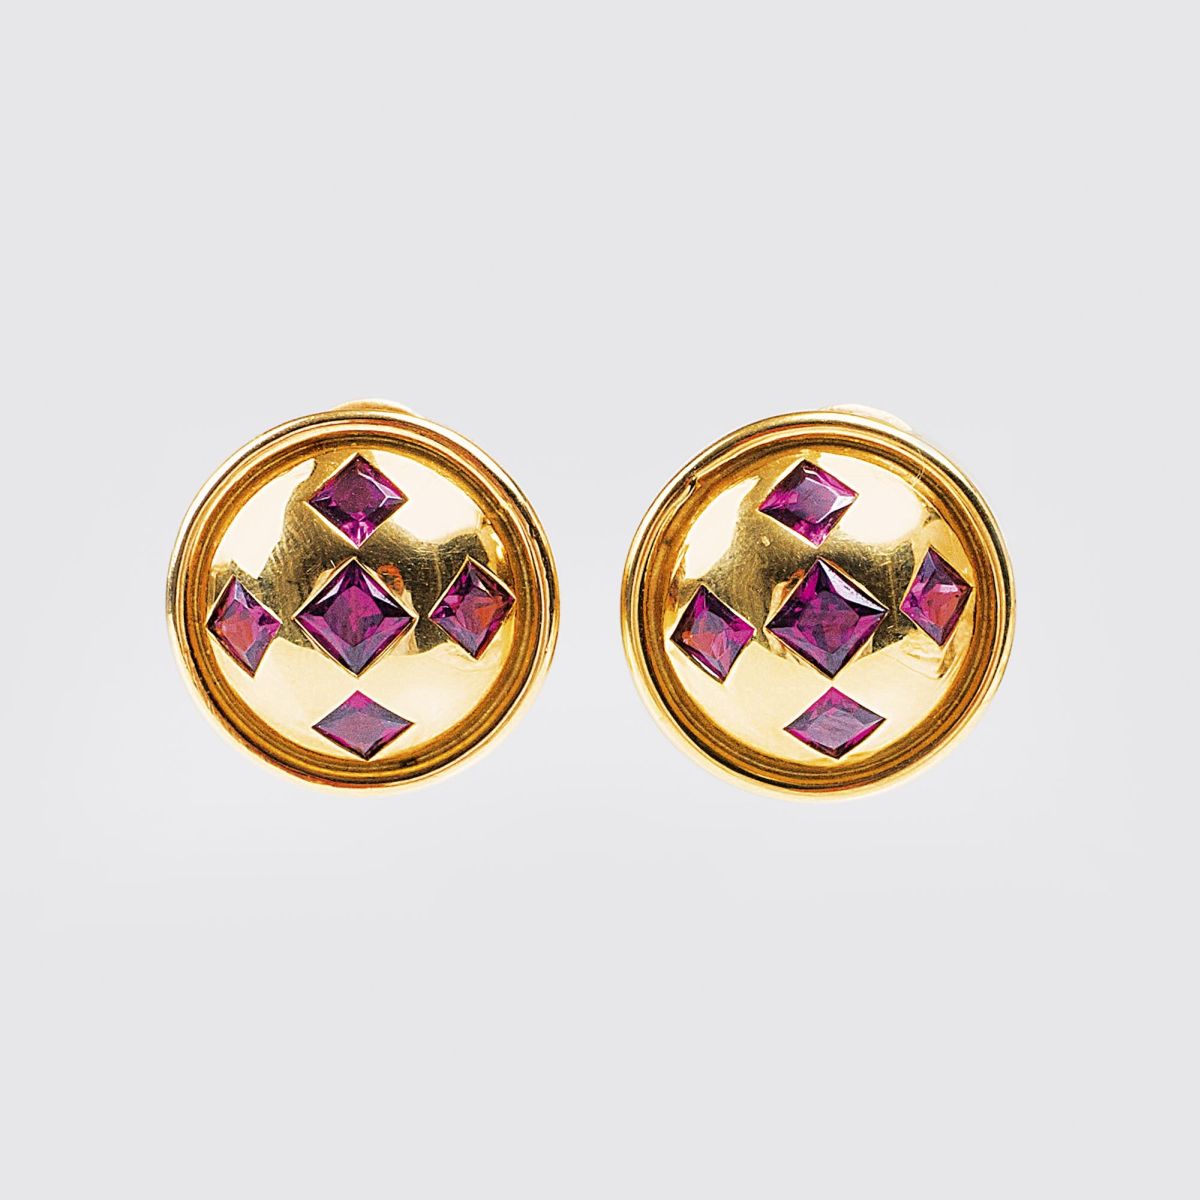 A Pair of Gold Earclips with rhodolit